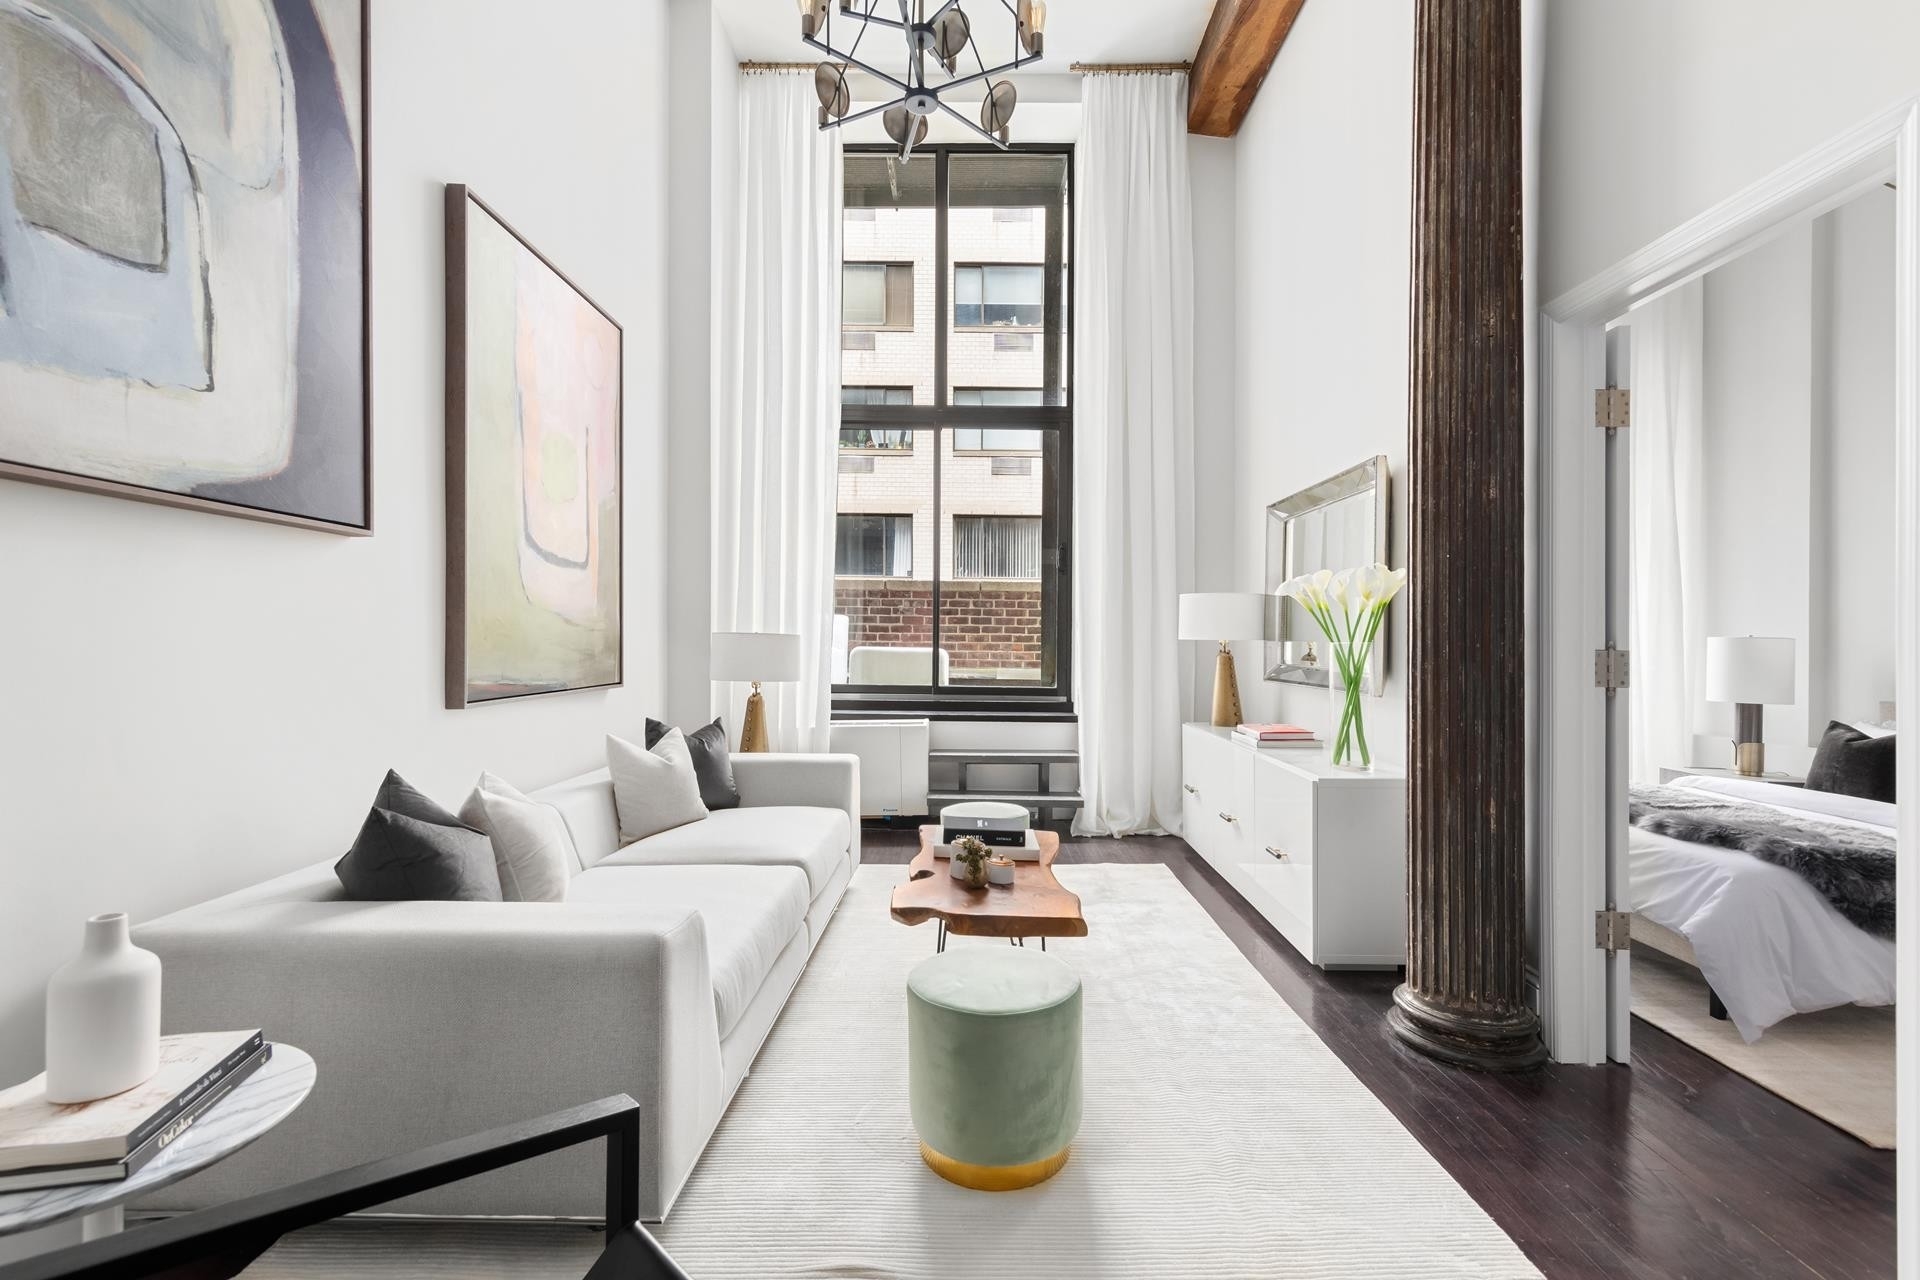 Property at 67 East 11th St, 305 New York